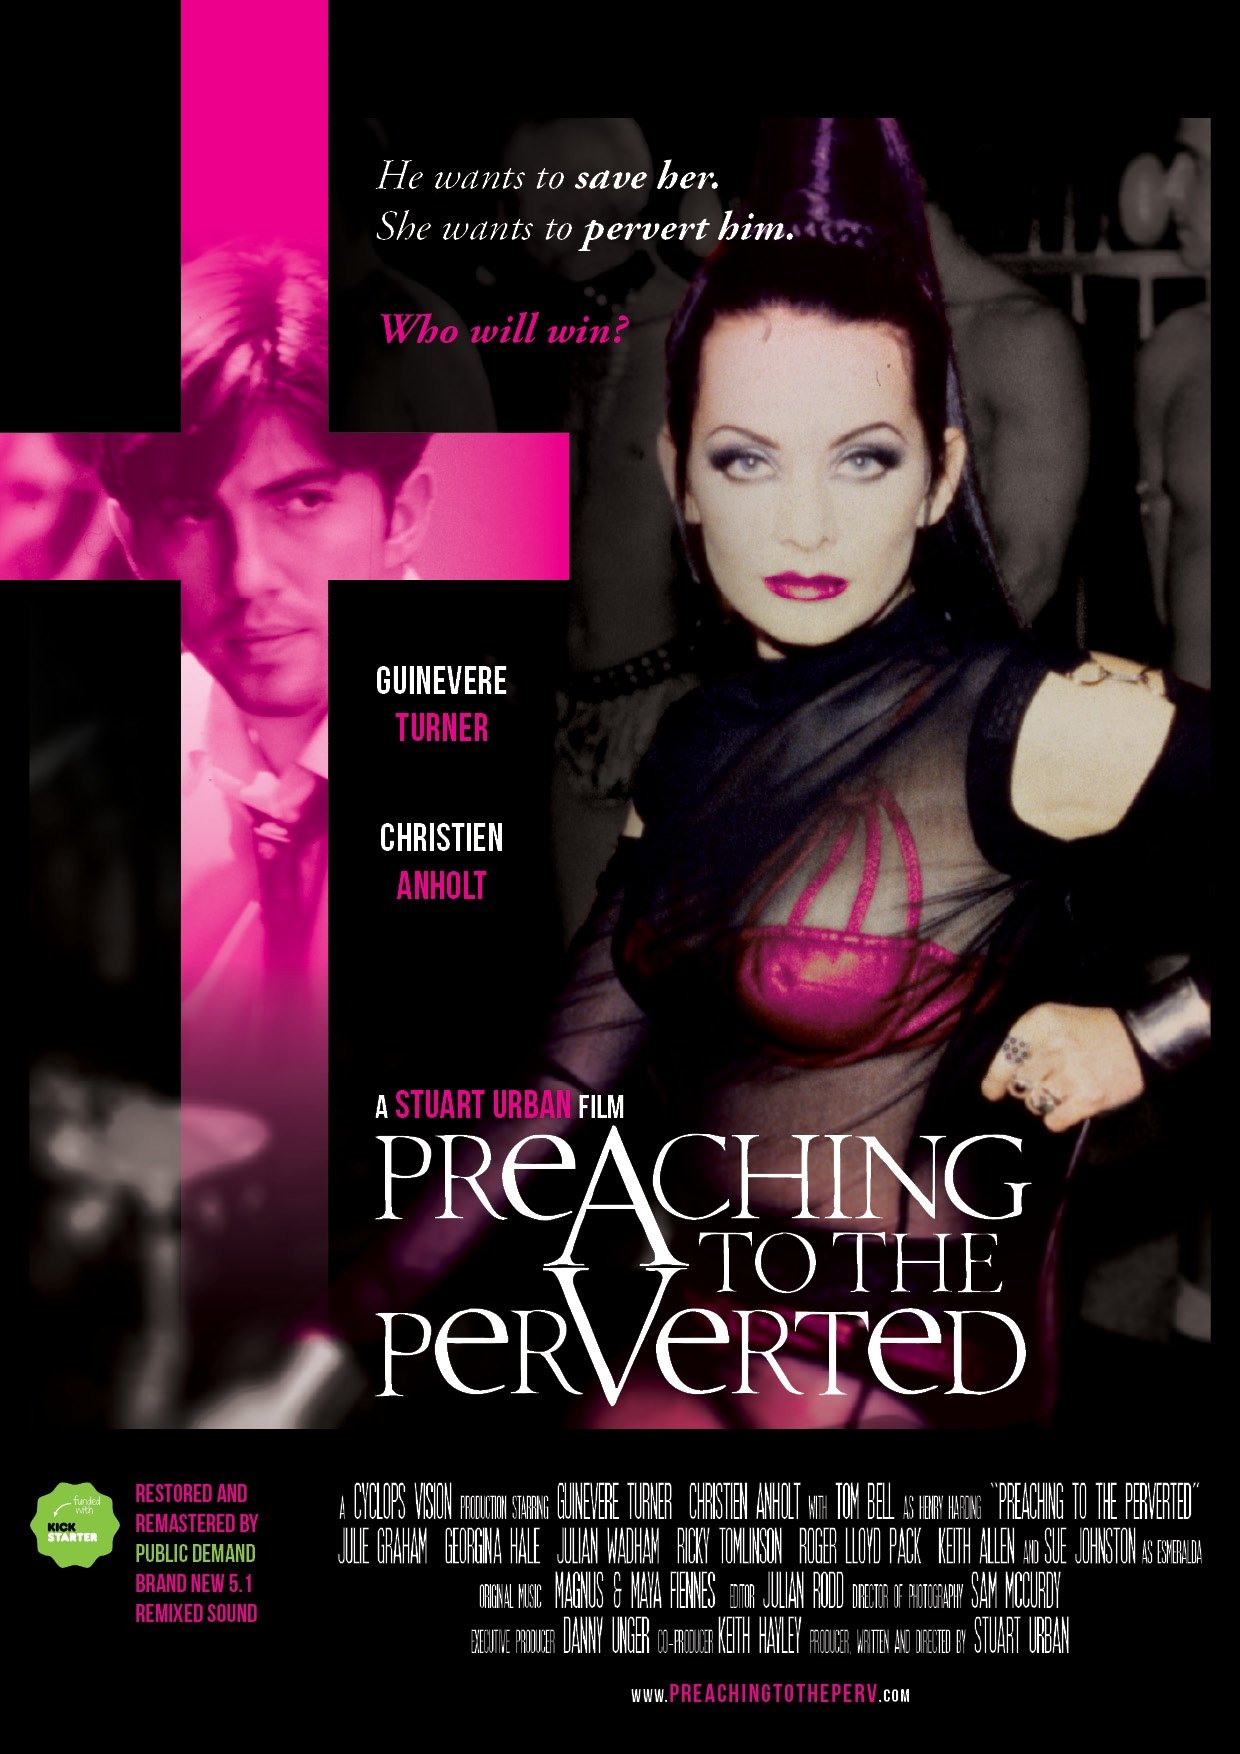 PREACHING TO THE PERVERTED (1997)